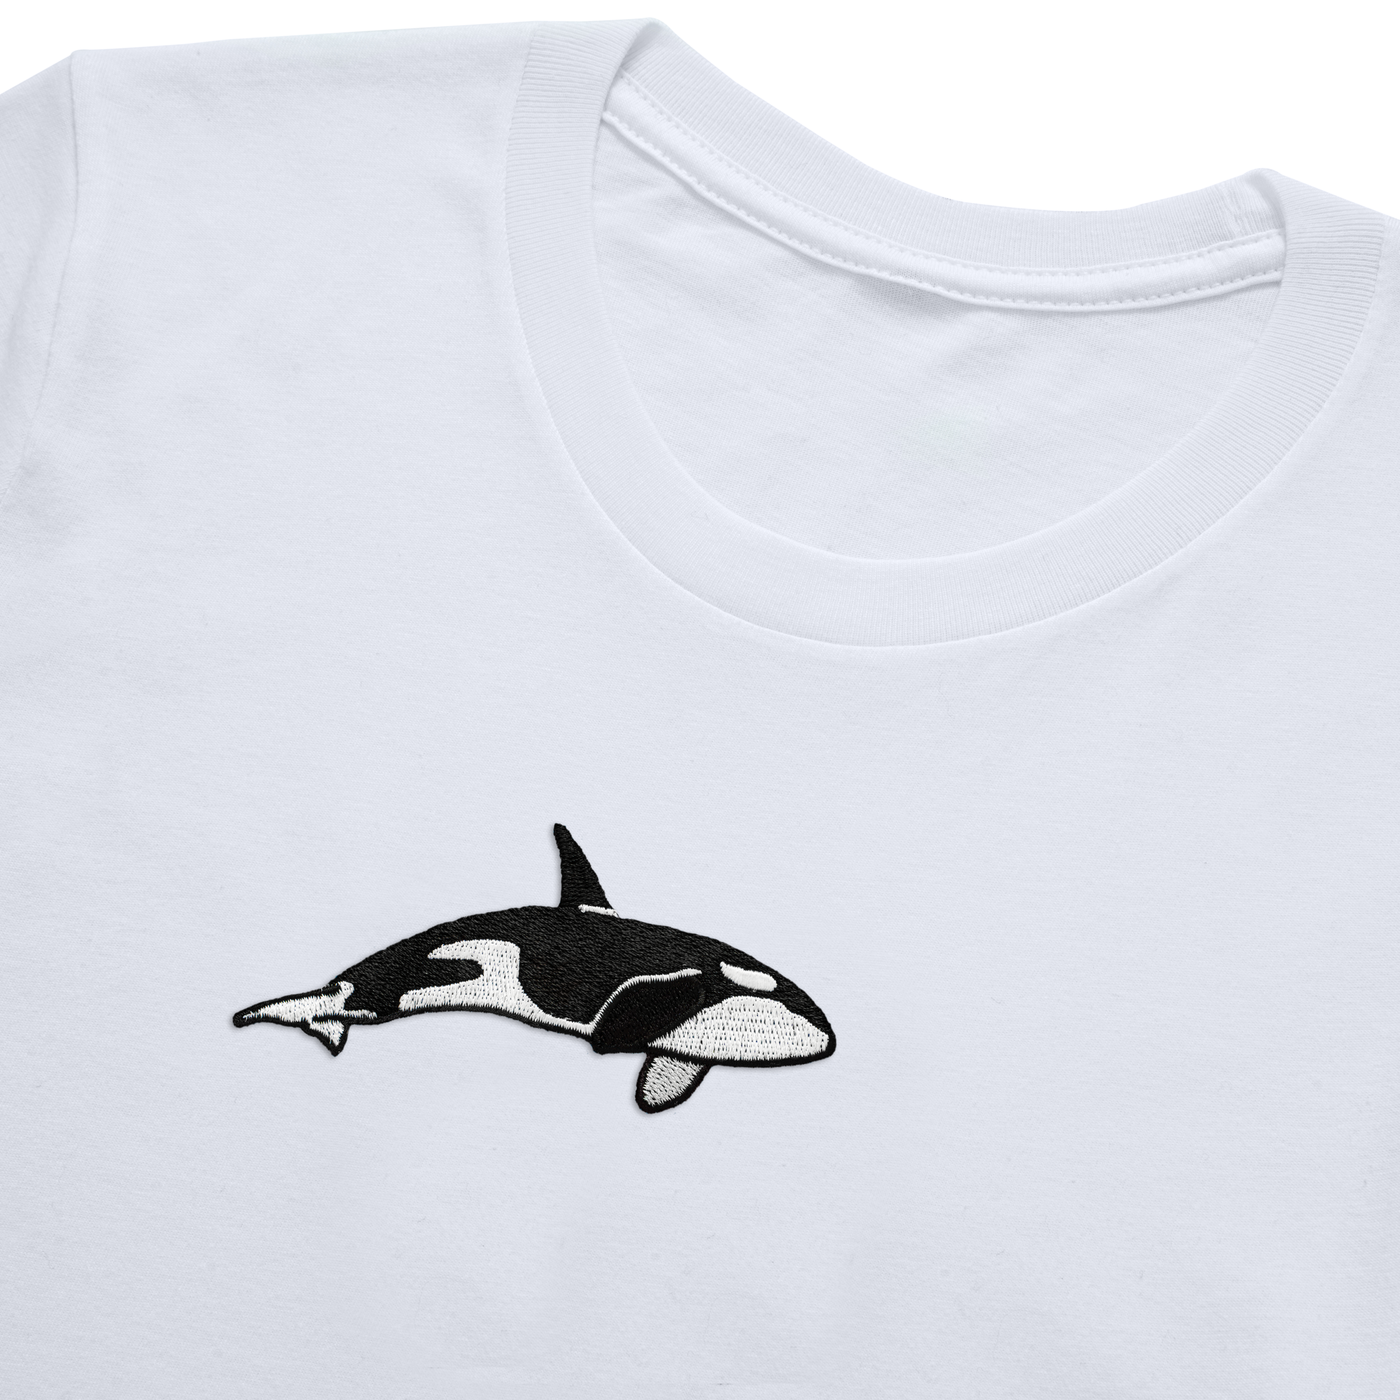 Bobby's Planet Kids Embroidered Orca T-Shirt from Seven Seas Fish Animals Collection in White Color#color_white